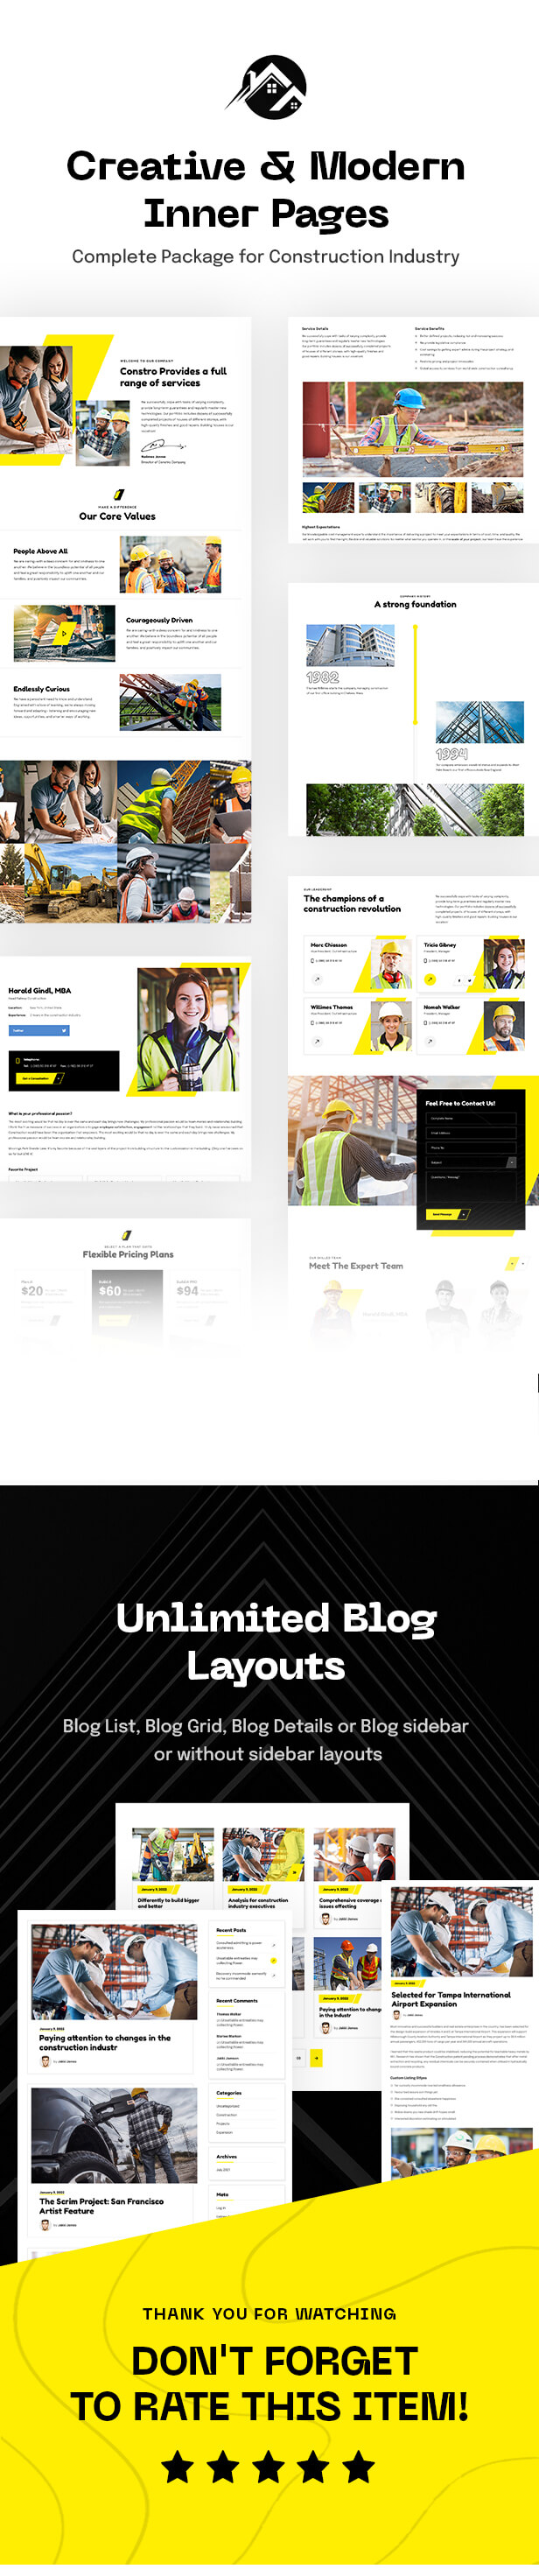 Builty - Industrial and Building Construction HTML Template - 5